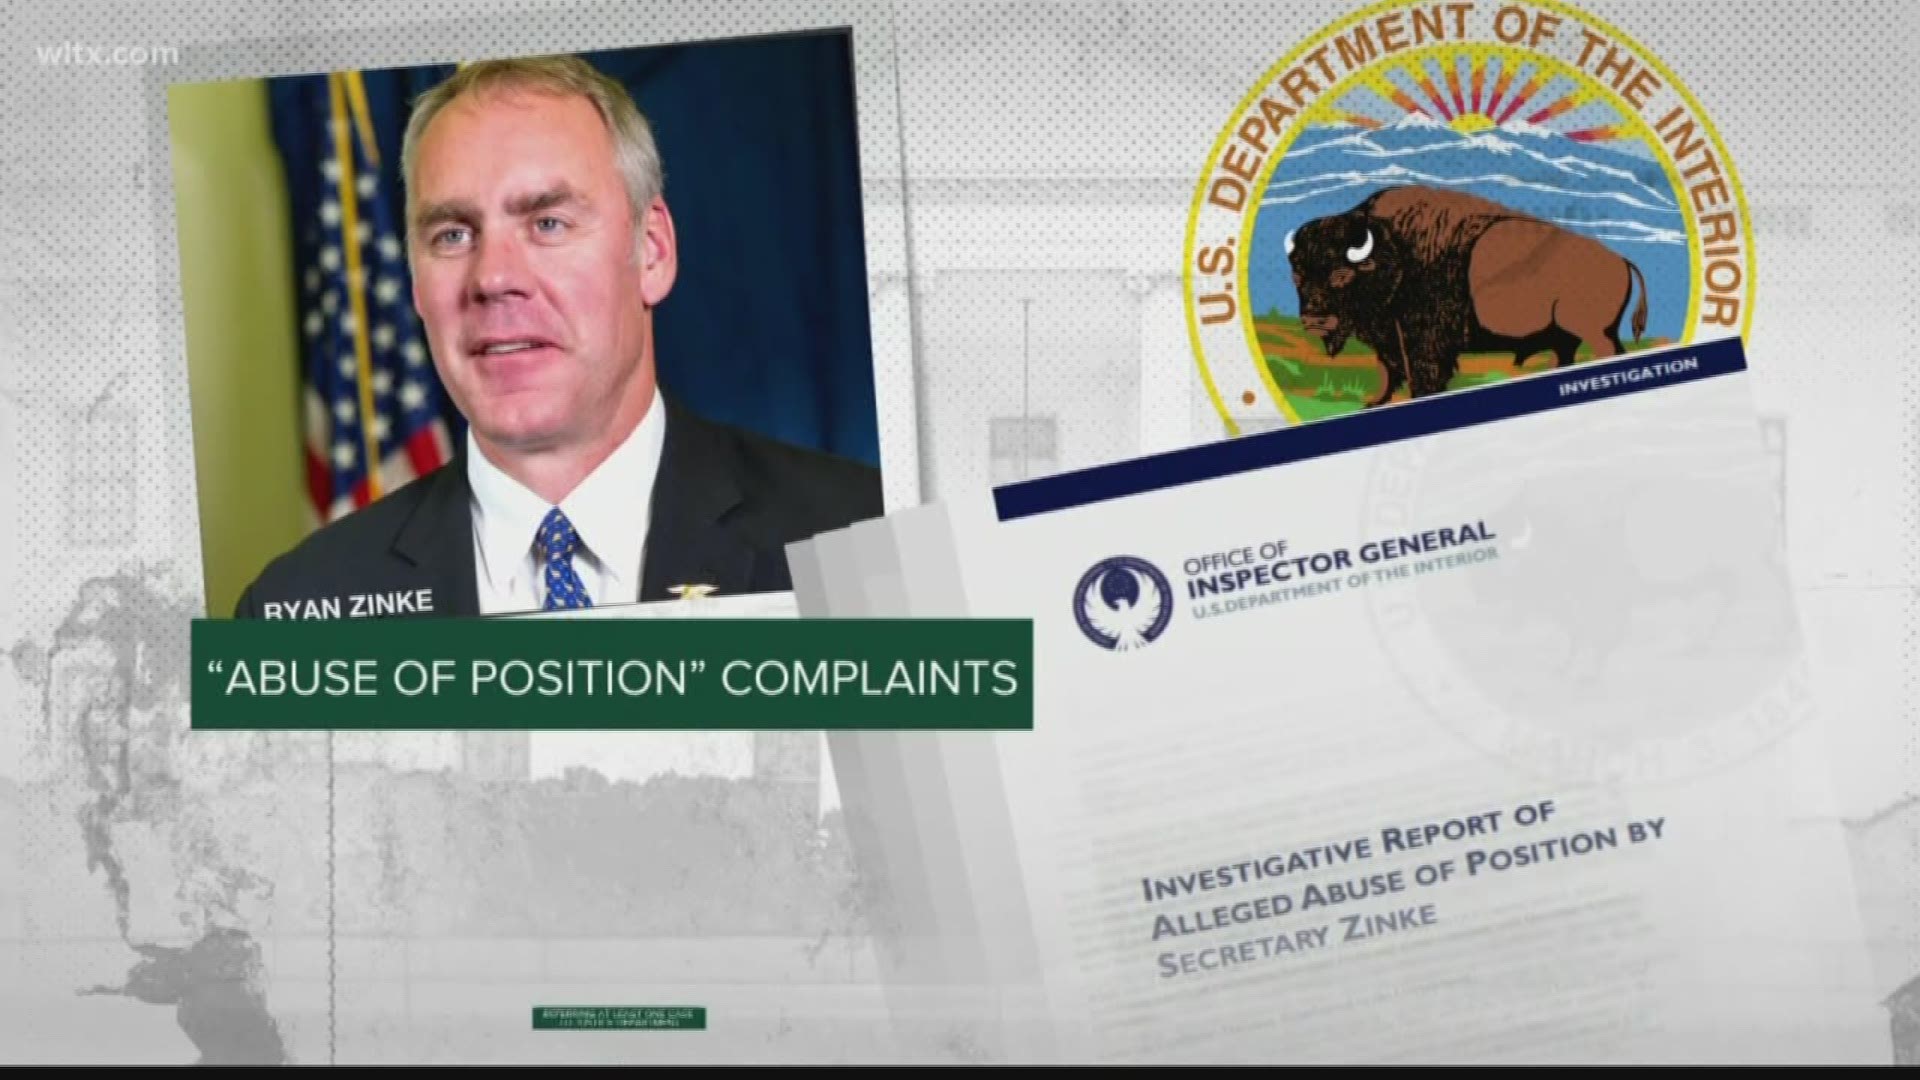 Ryan Zinke, the embattled secretary of the Interior, is leaving the administration at the end of the year, Trump said Saturday.